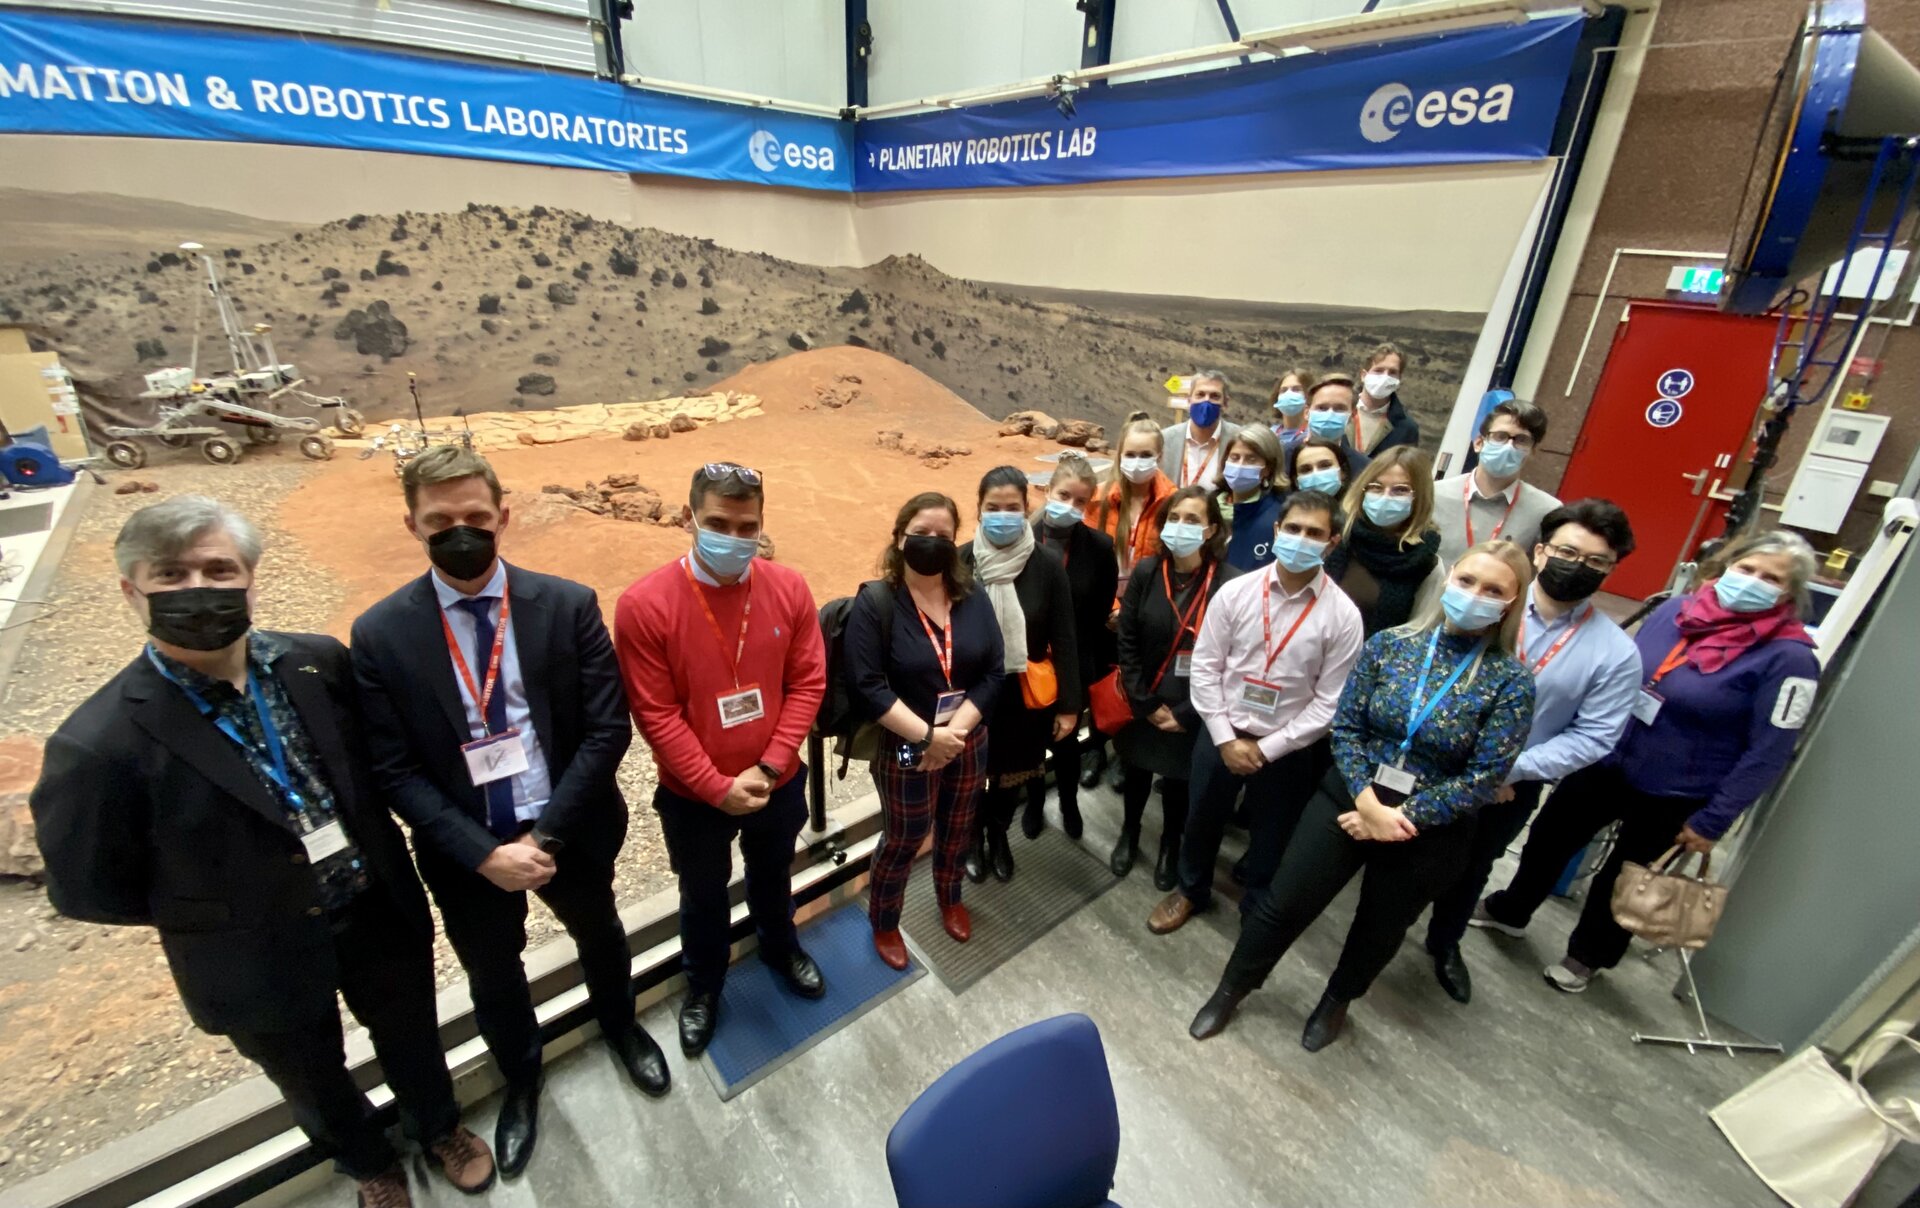 Participants of the 2021 ESA/ECSL Executive Course on Space Law and Policy